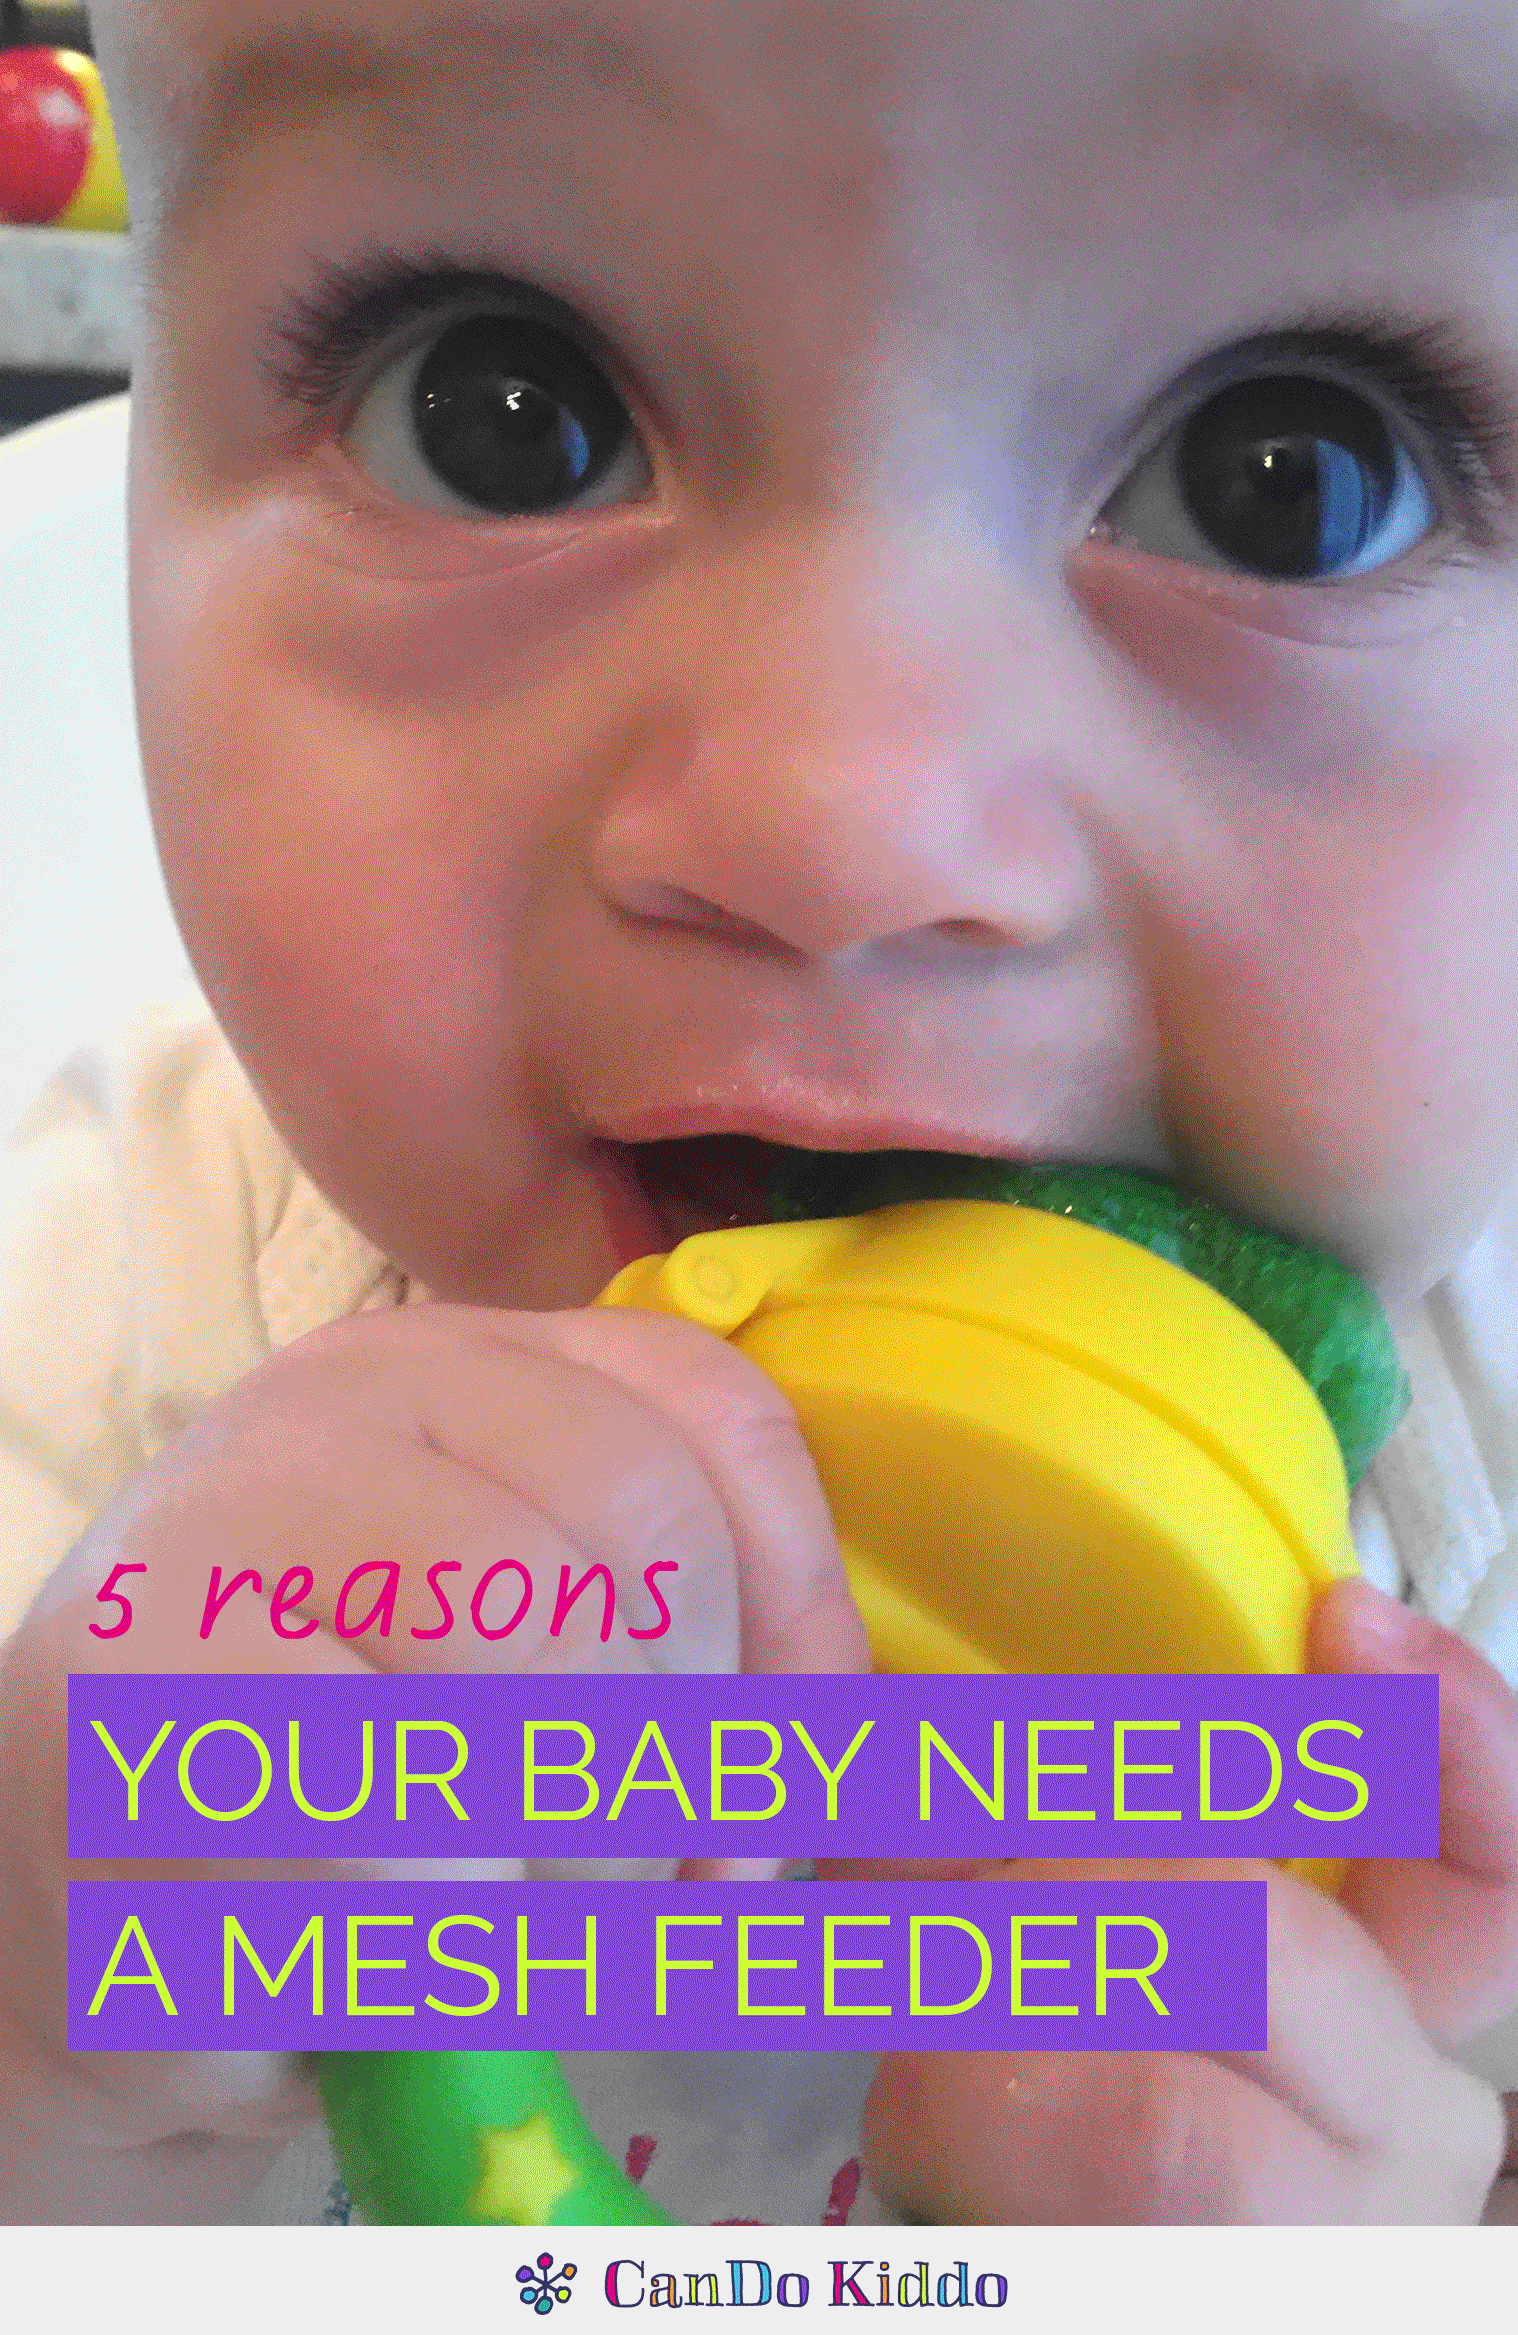 5 Reasons Your Baby Needs A Mesh Feeder